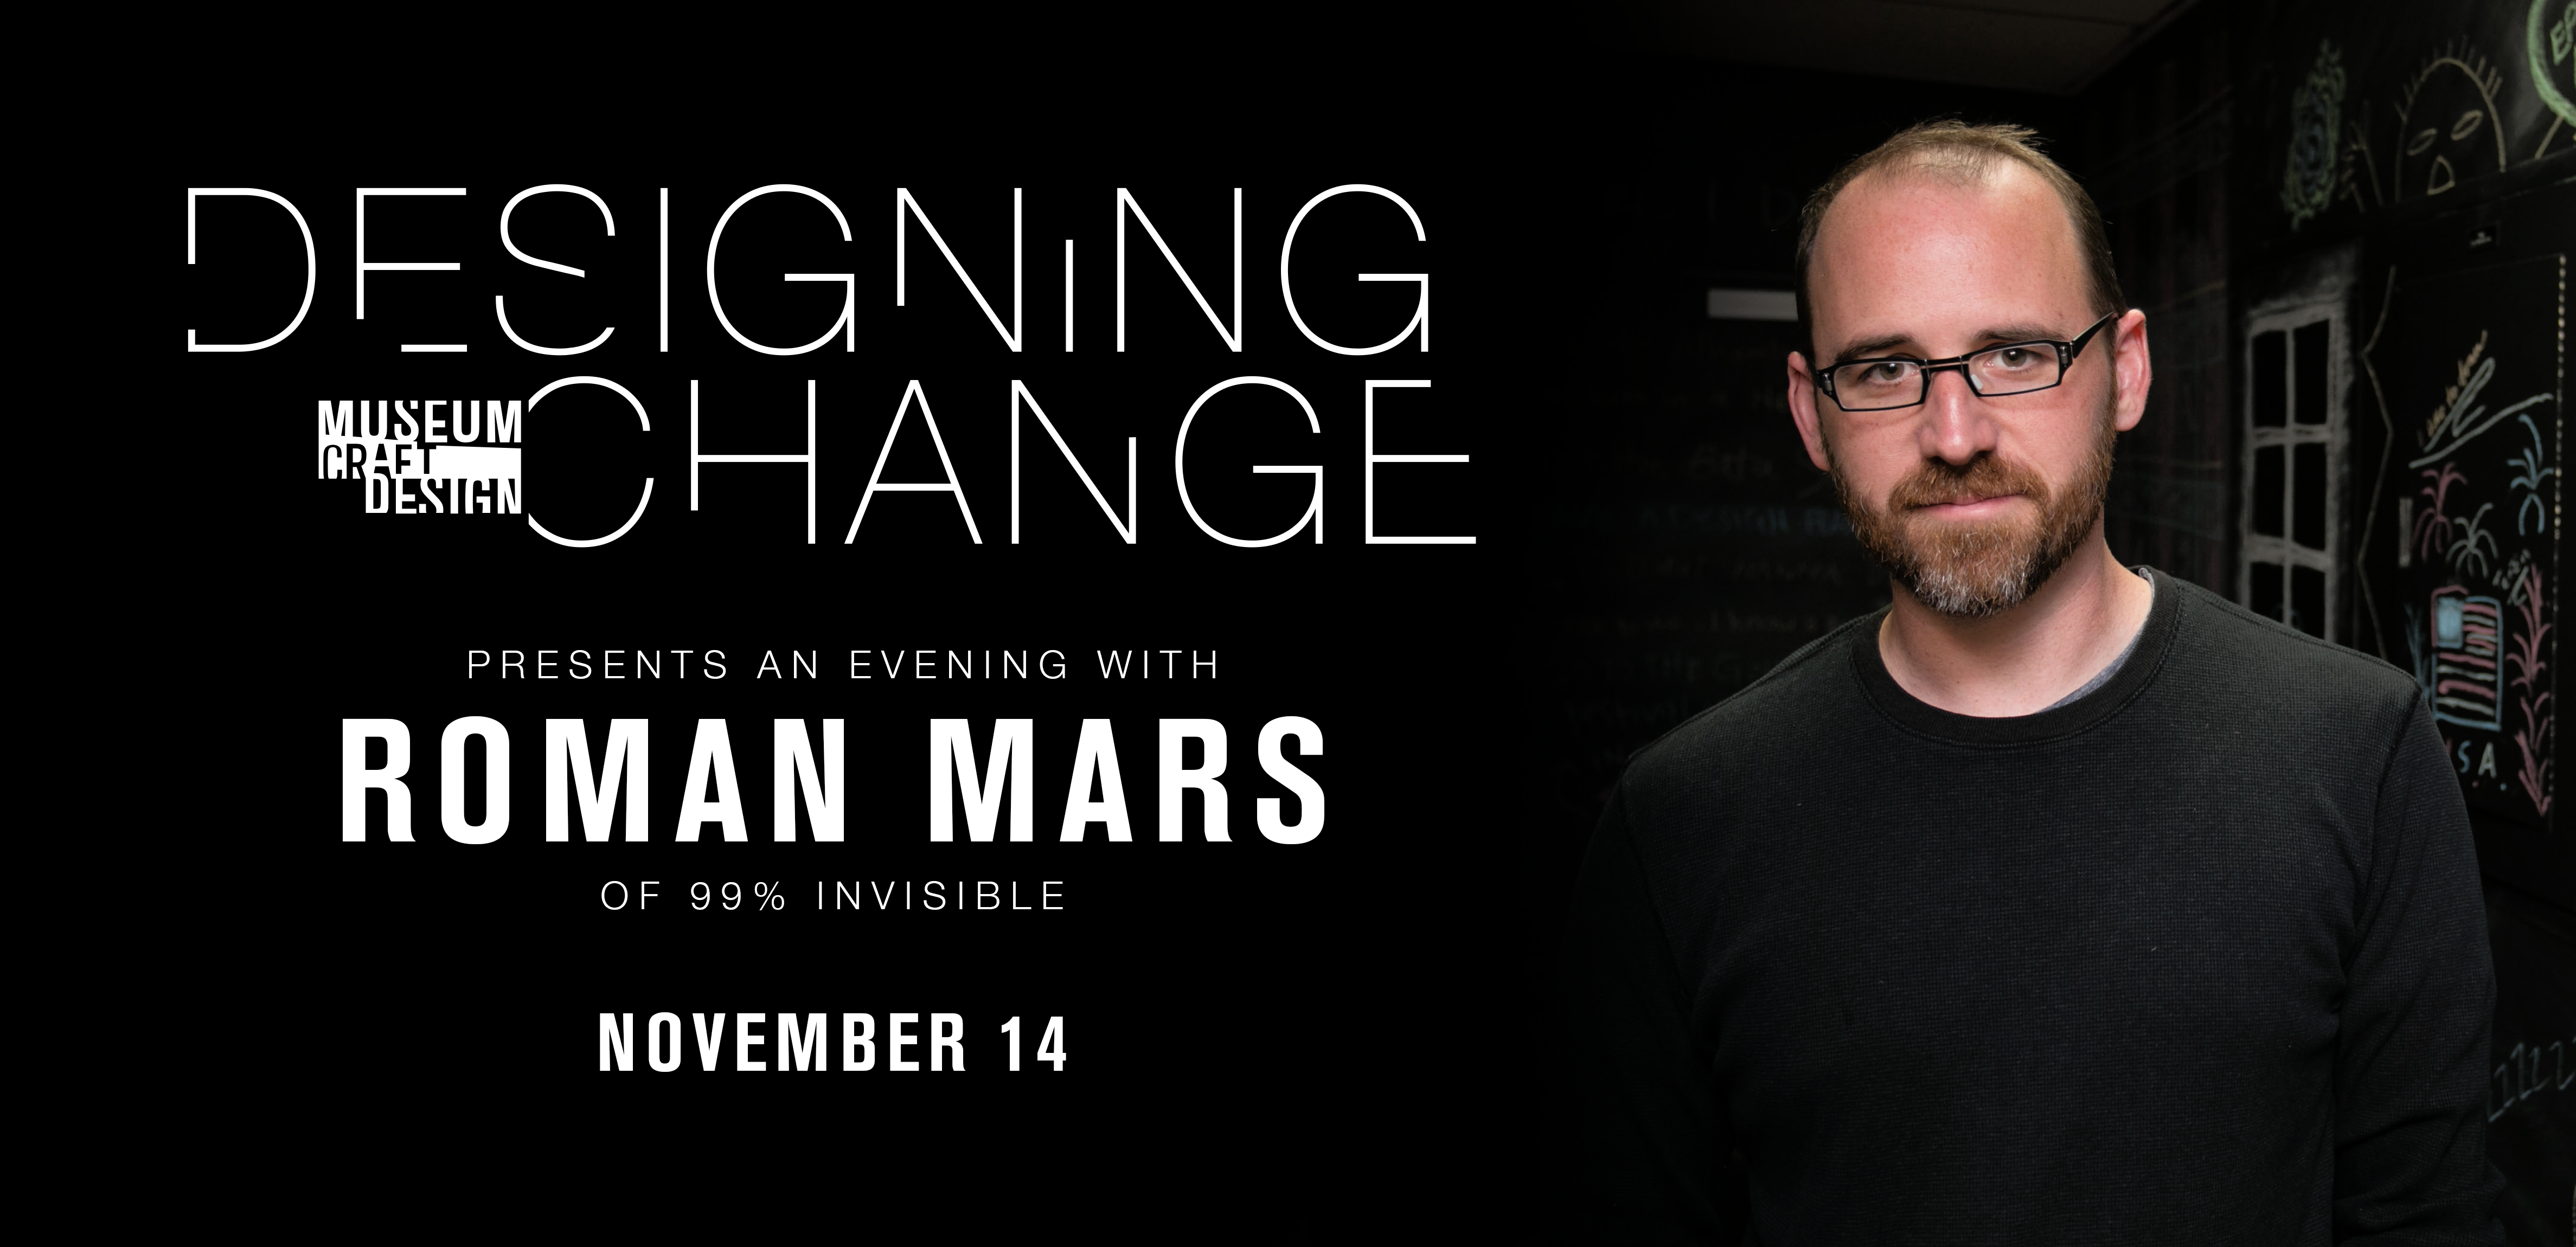 Designing Change: An Evening with Roman Mars